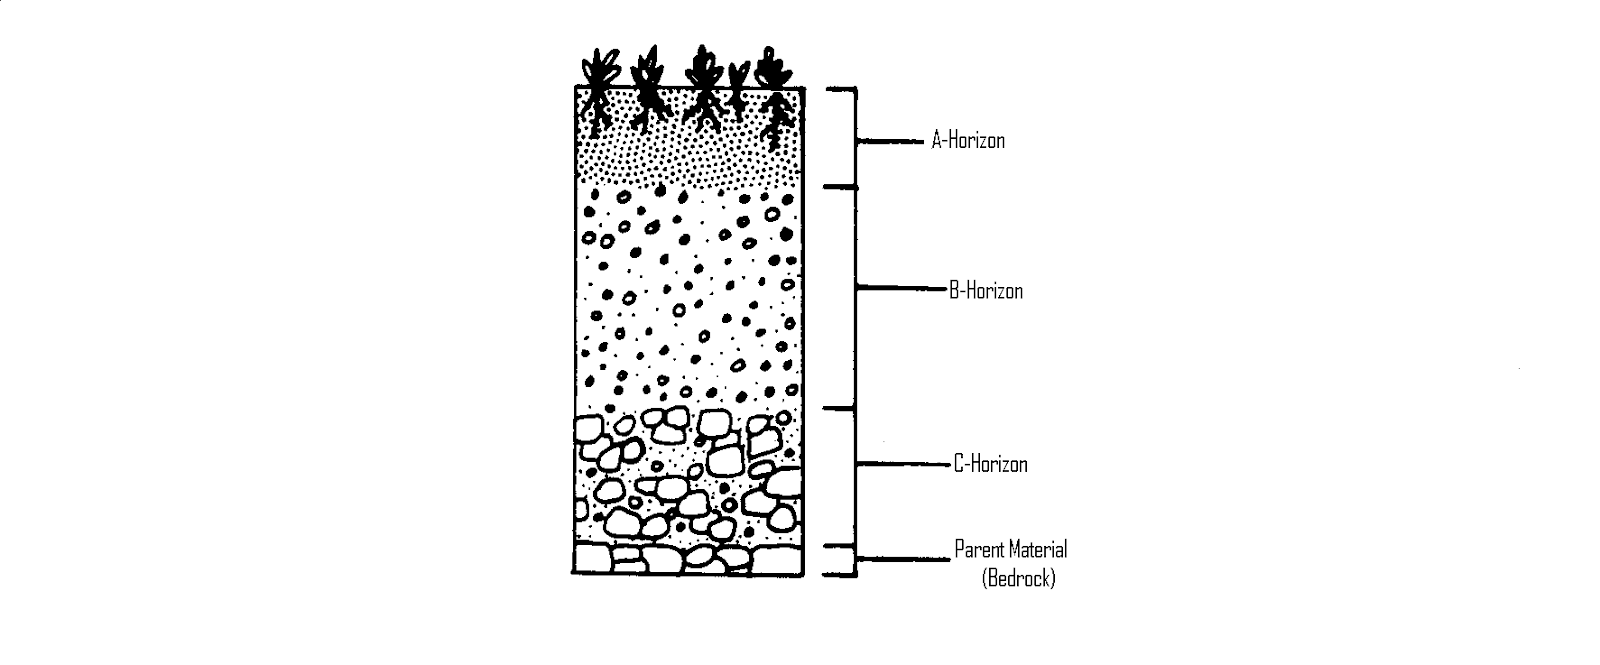 20.20 Soil Formation - Will Pollard  Library  Formative In Soil Formation Worksheet Answers